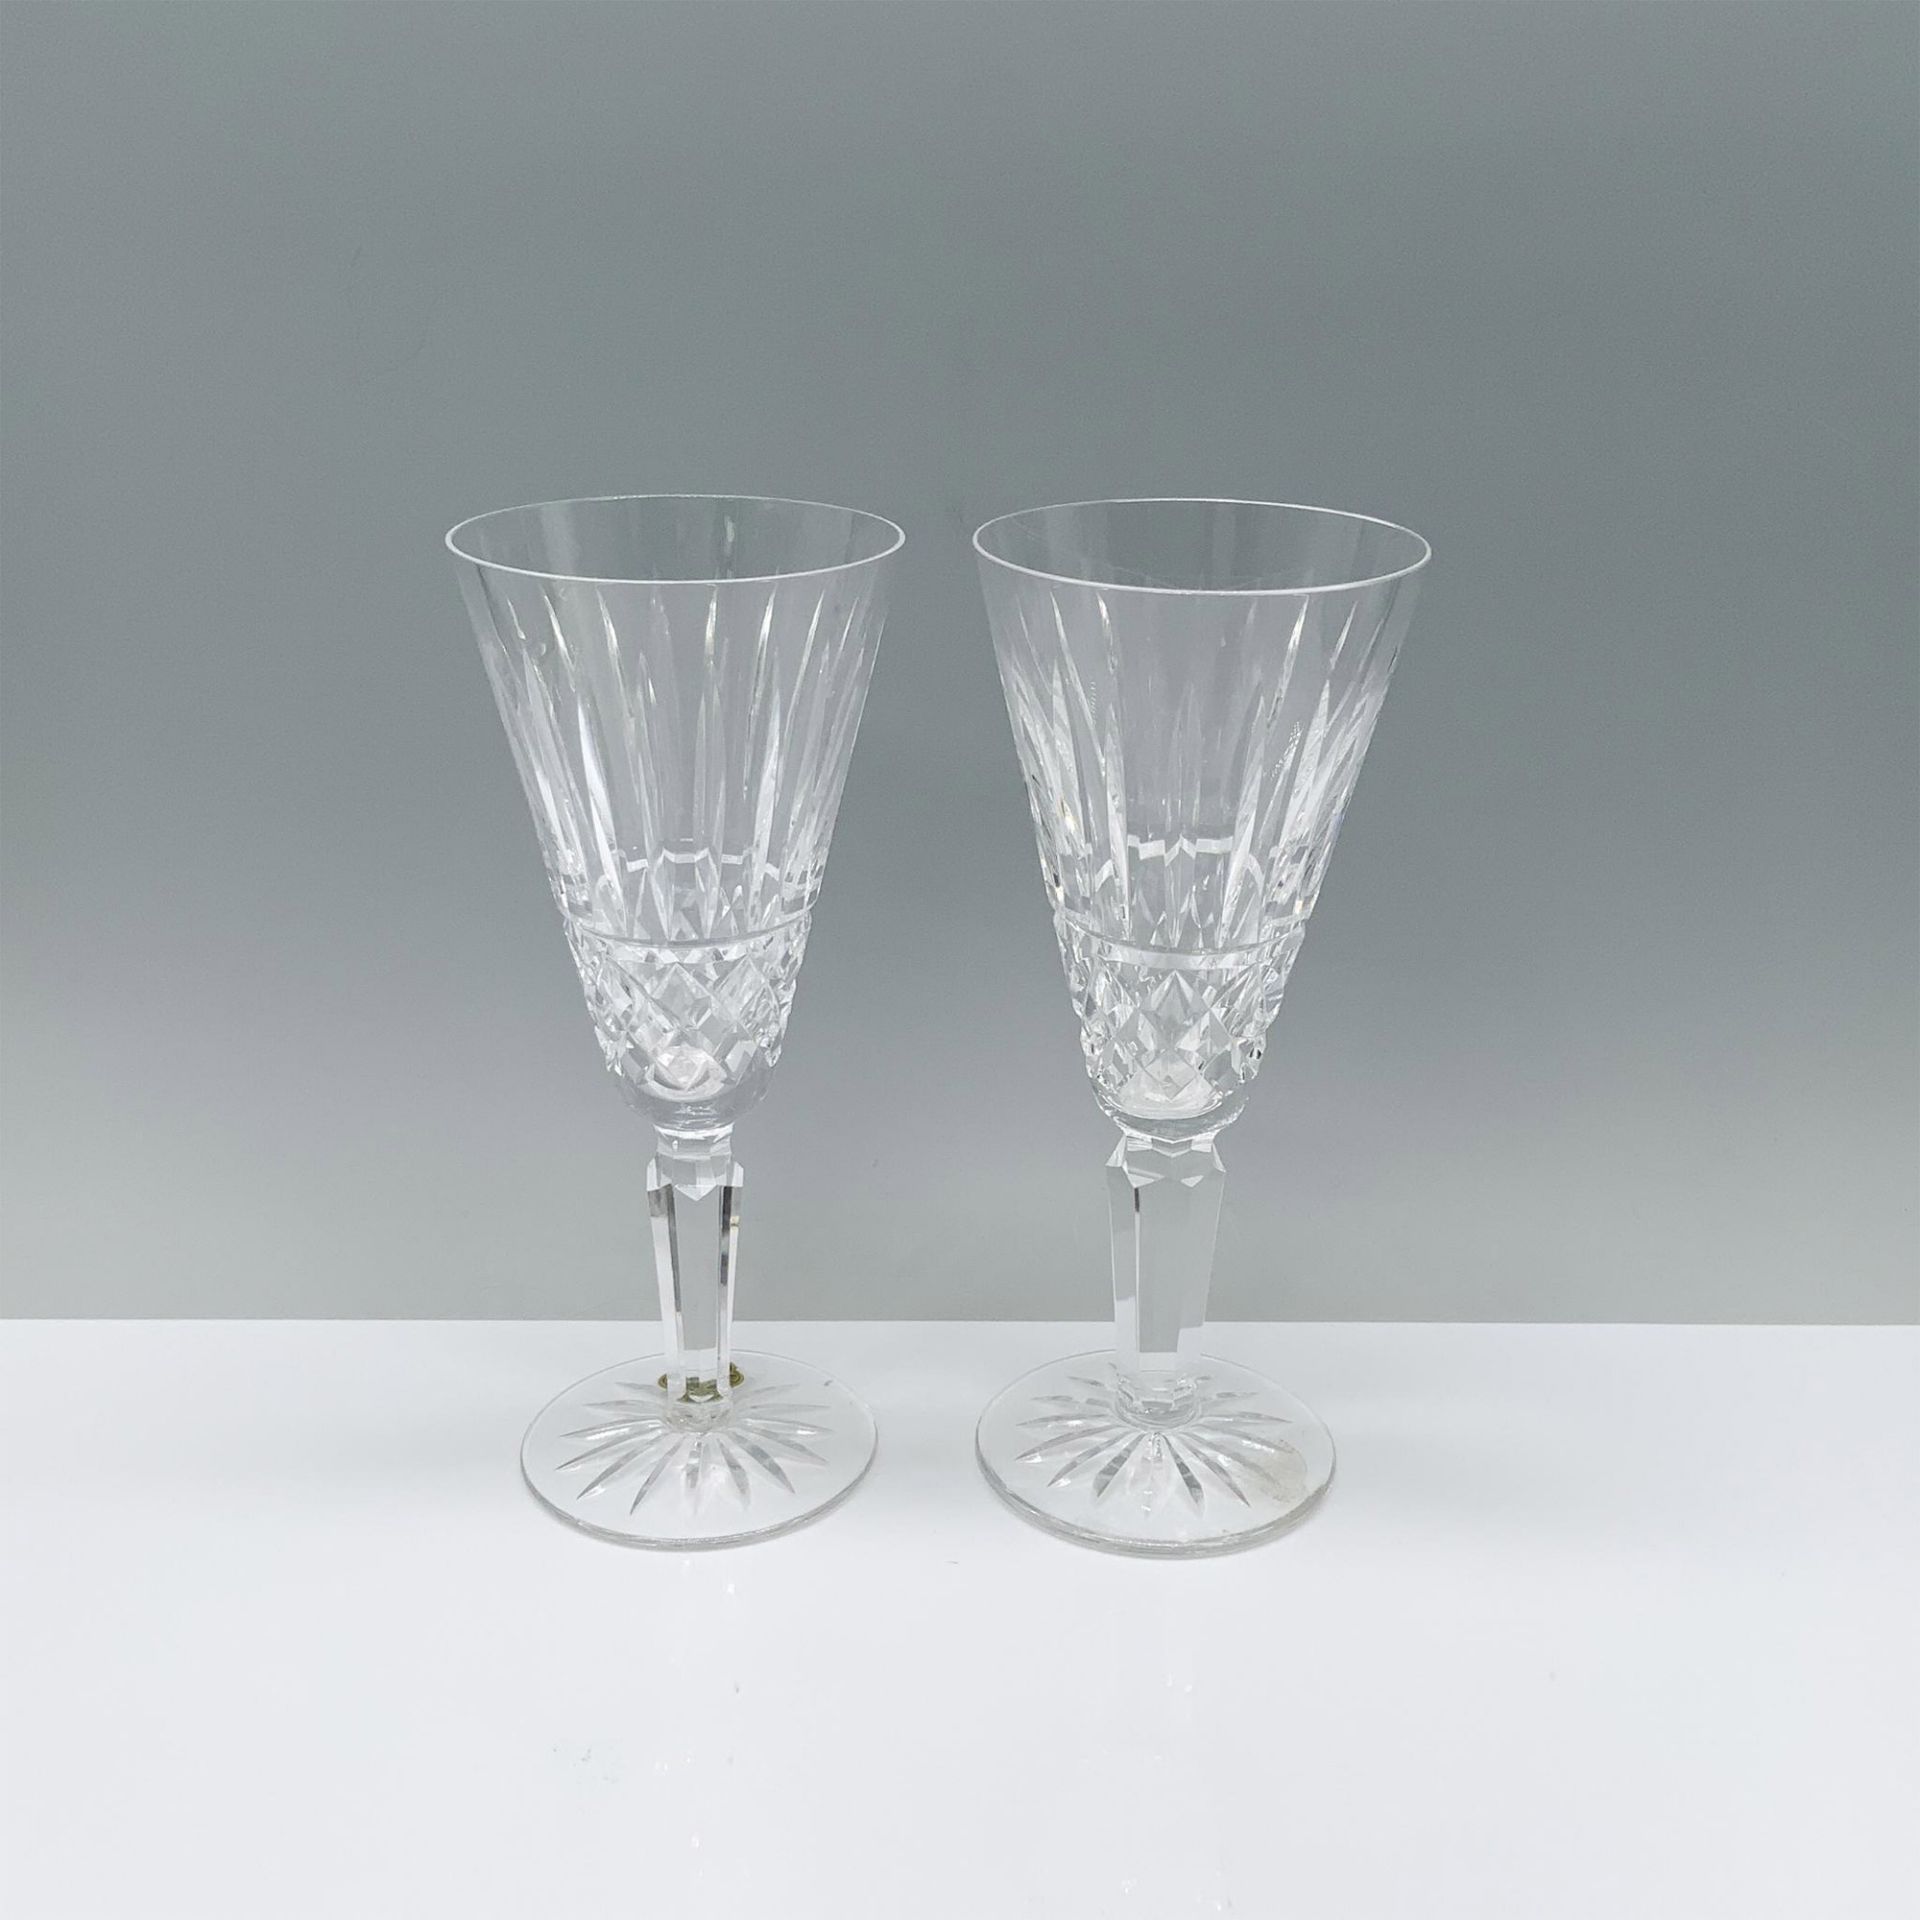 Pair of Waterford Crystal Flute Champagne Glasses, Maeve - Image 2 of 3